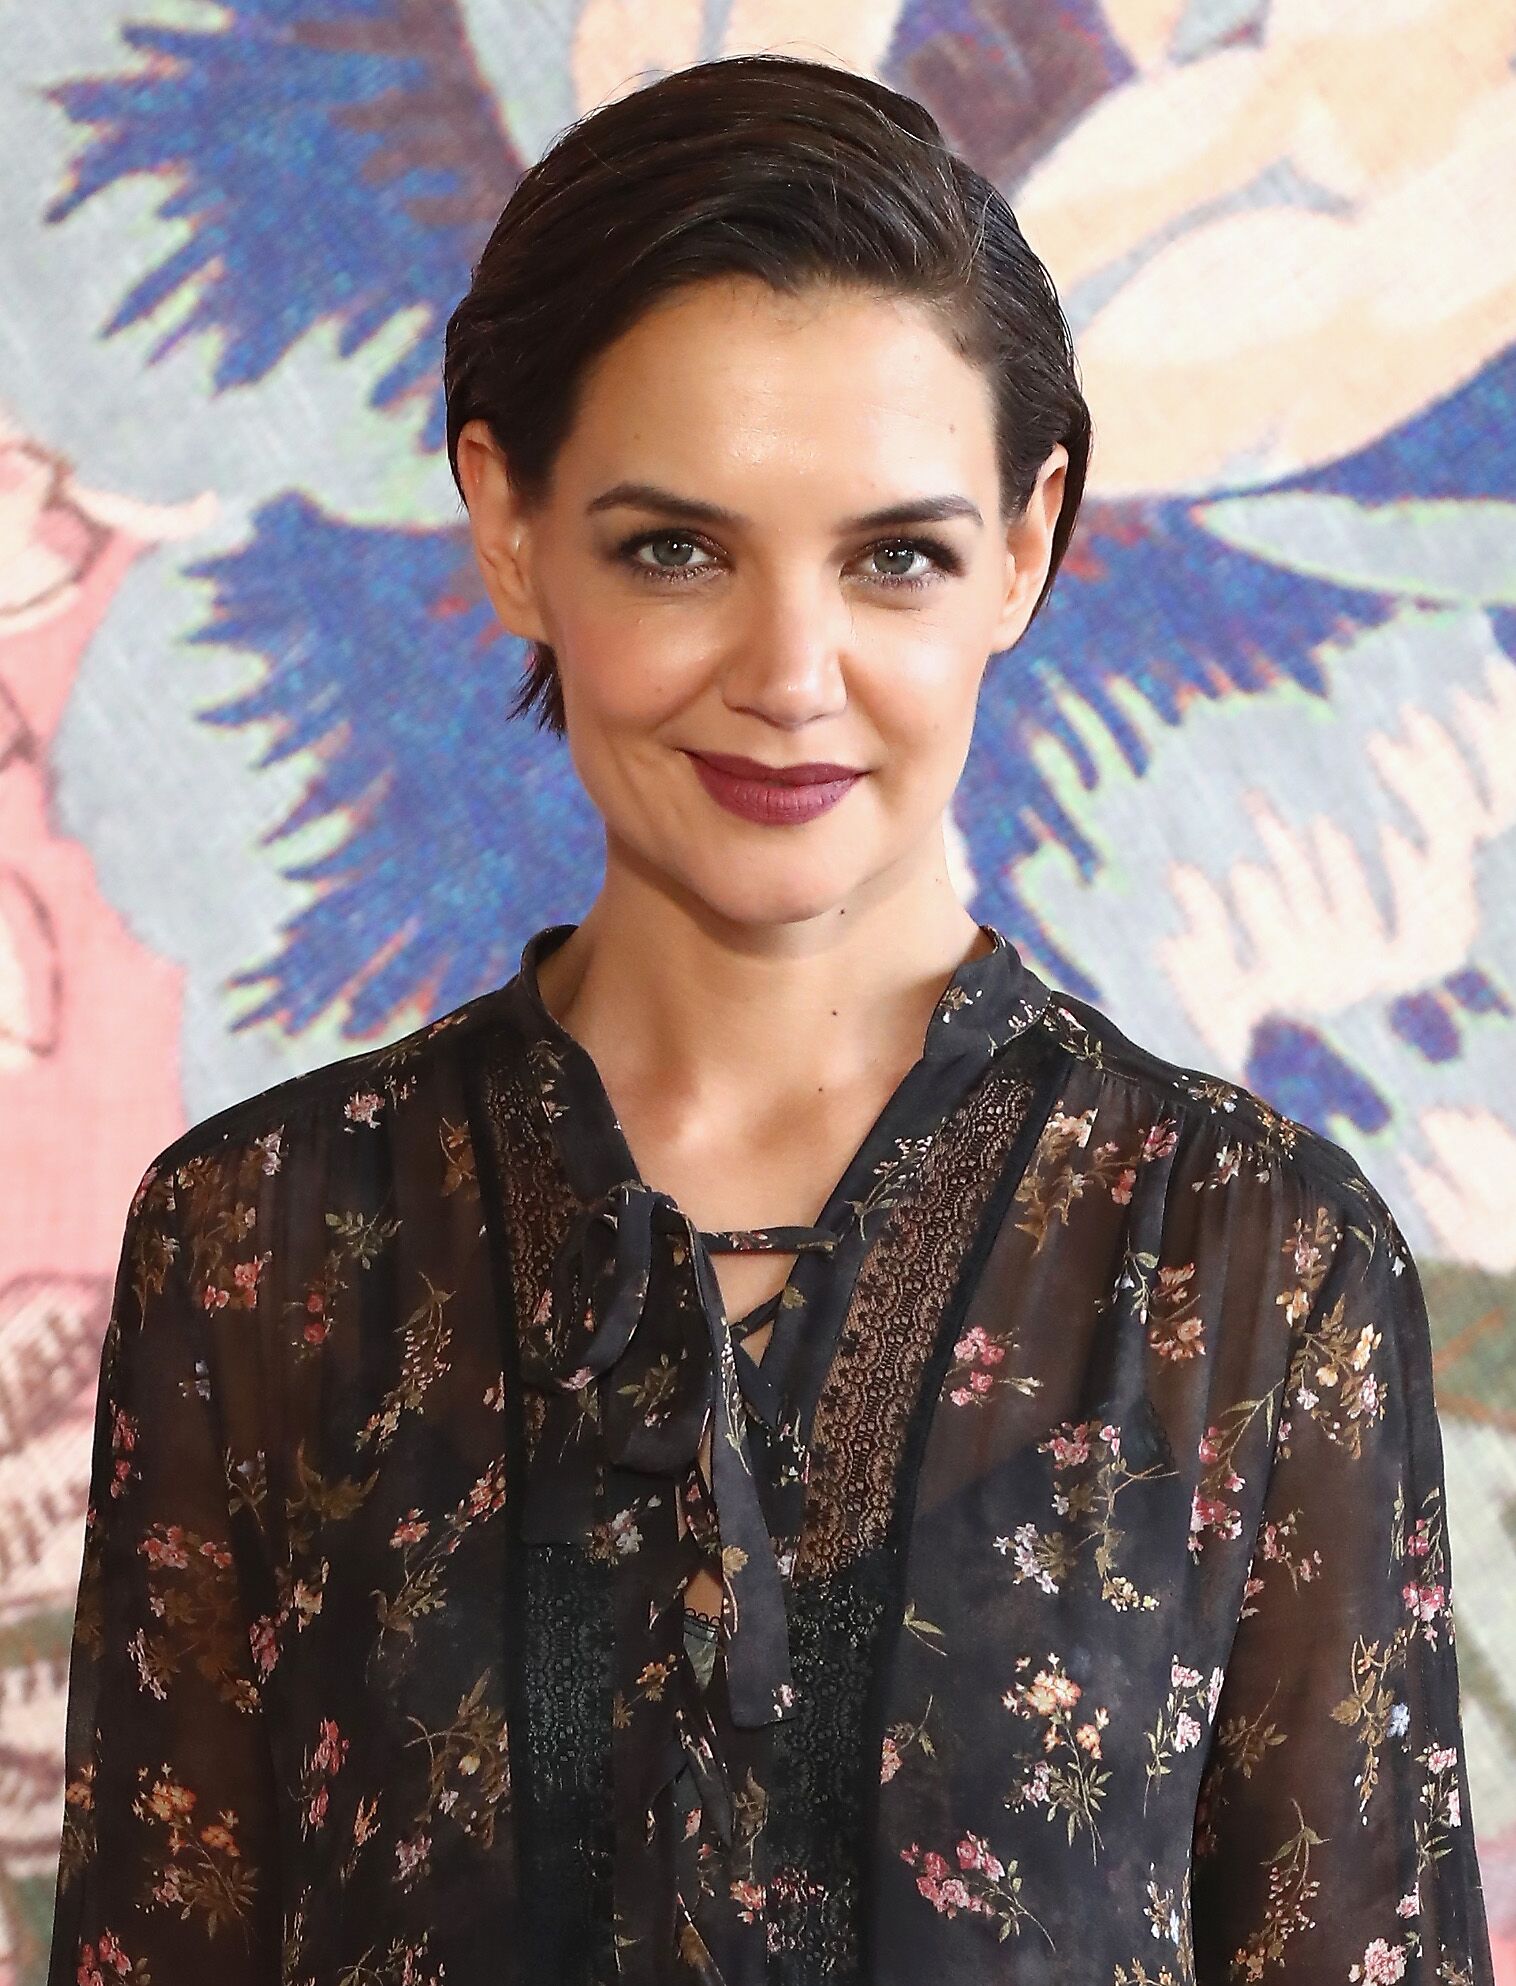 Actor Katie Holmes attends the Zimmermann fashion show during New York Fashion Week: The Shows at Gallery I at Spring Studios on February 12, 2018 in New York City.  | Source: Getty Images